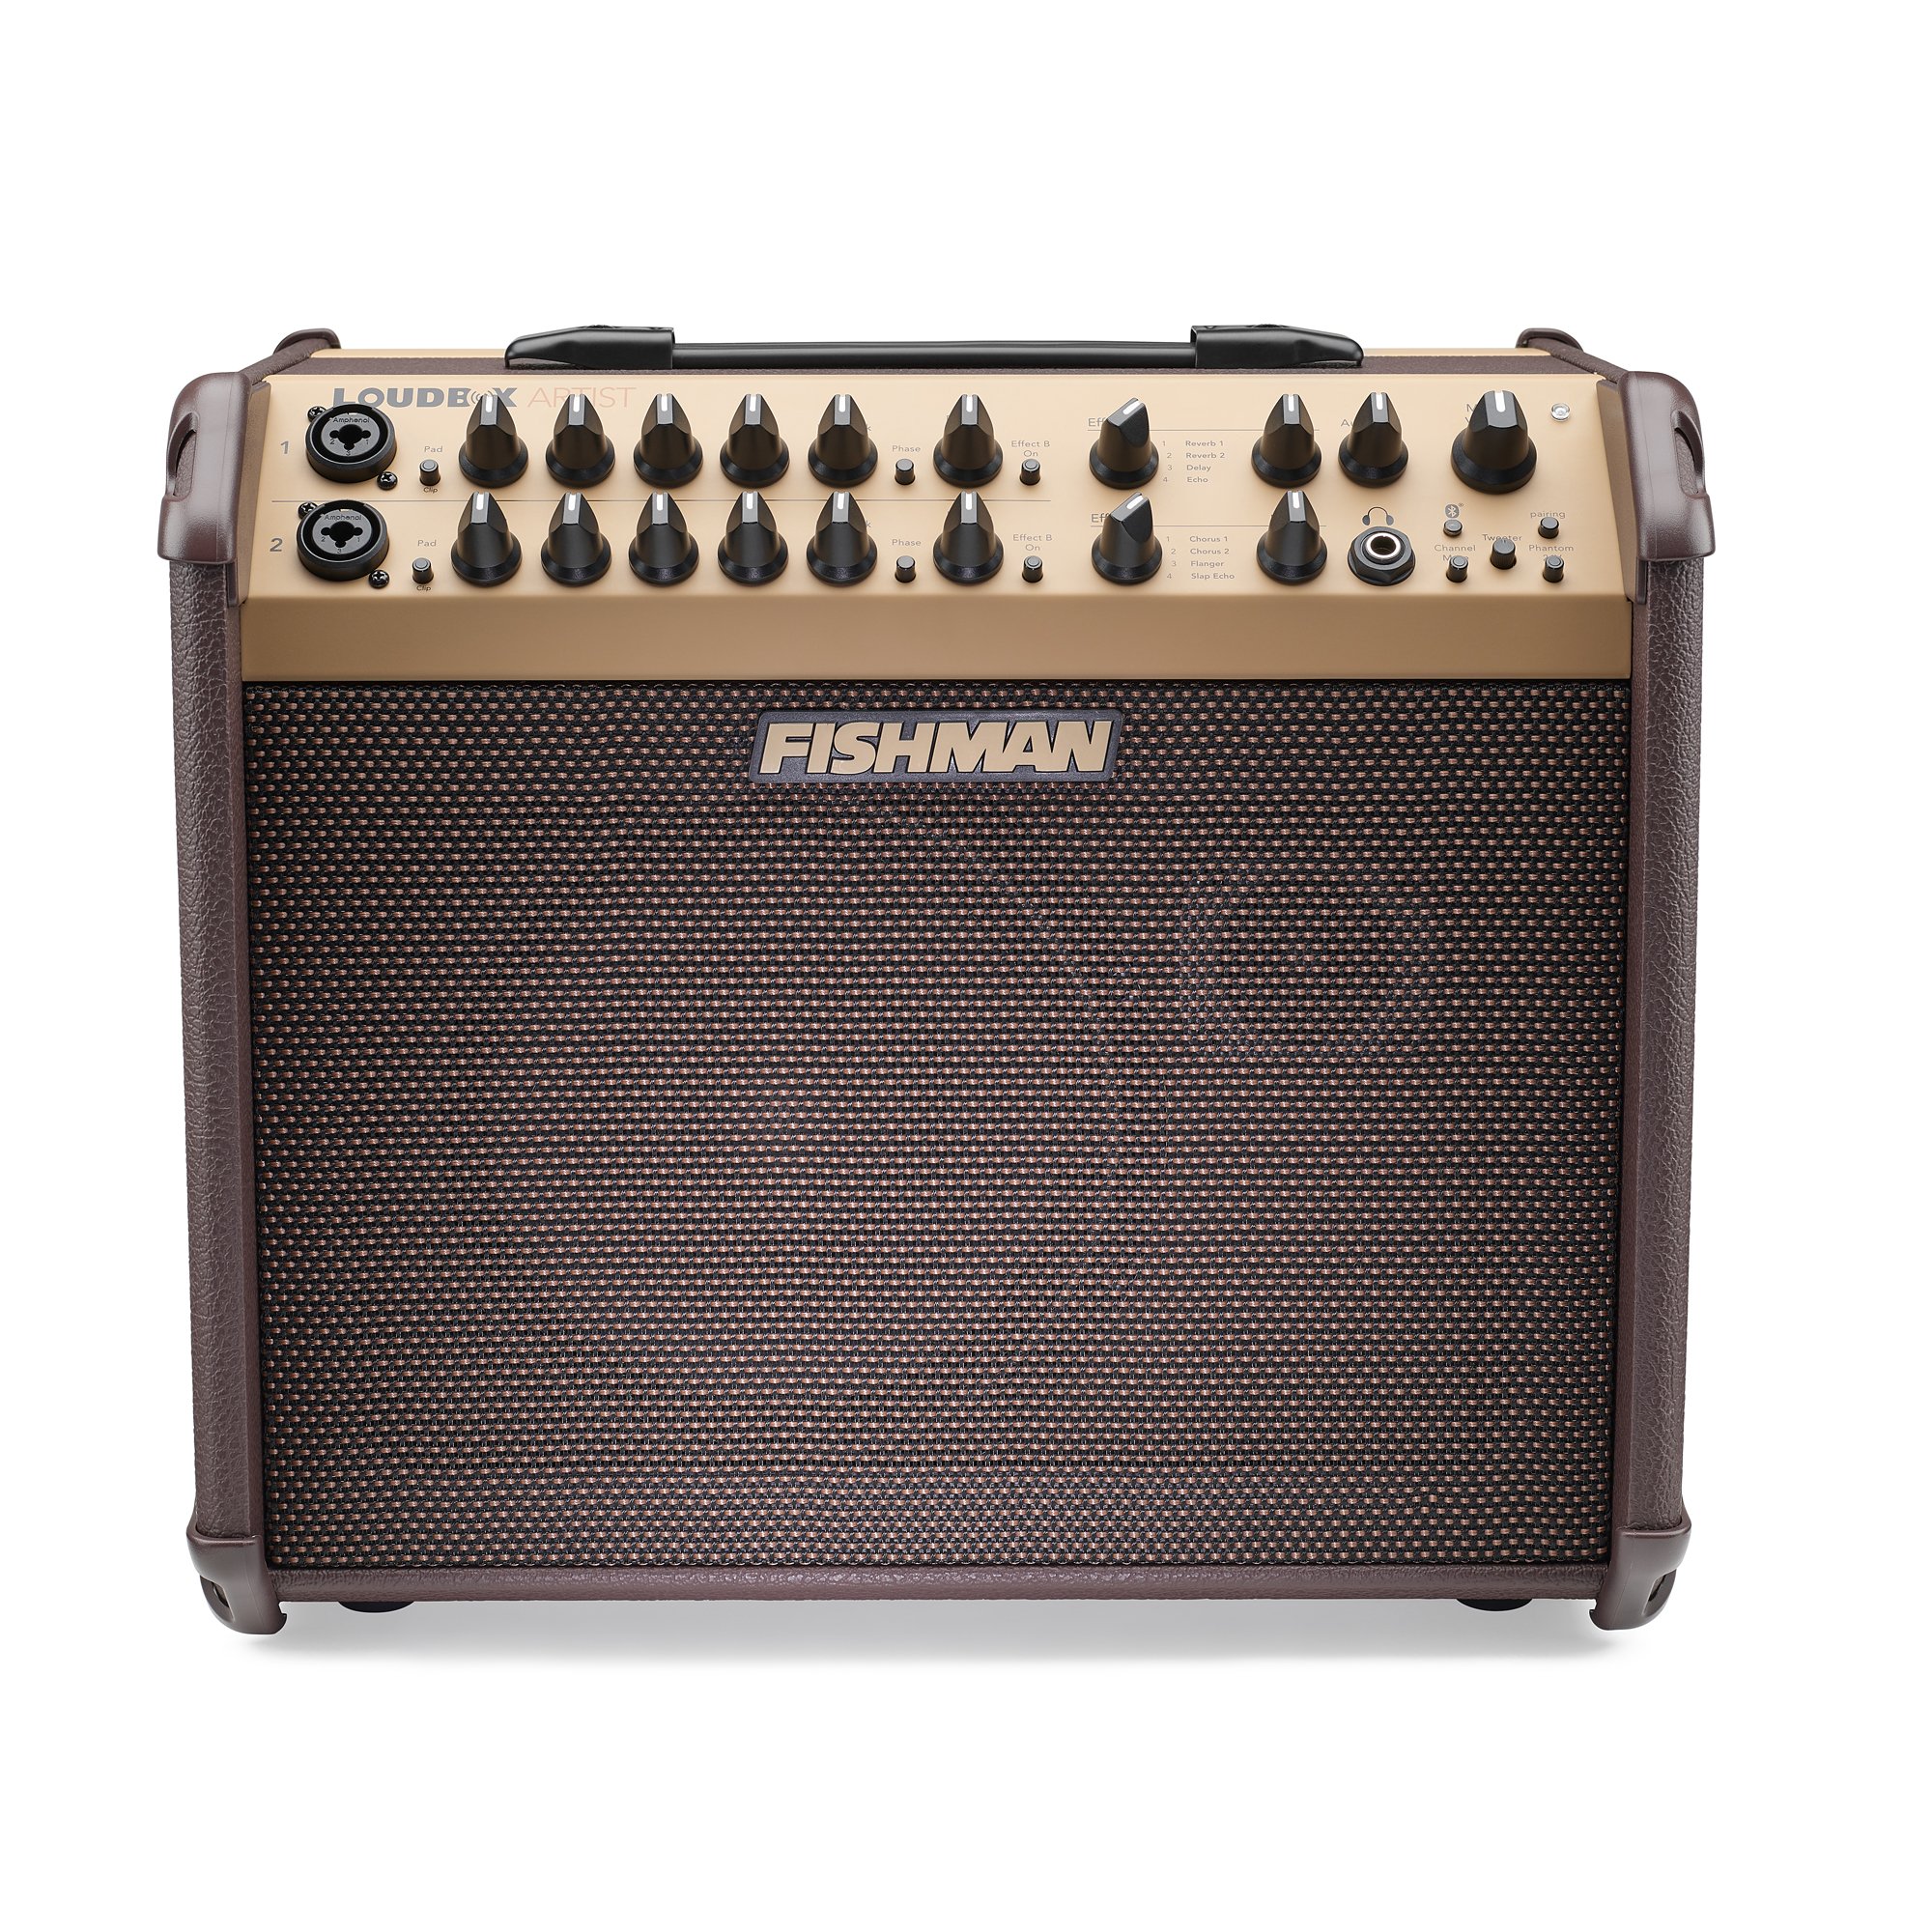 Fishman PRO-LBT-600 Loudbox Artist 120-Watt Acoustic Guitar Combo Amp with Bluetooth and On-board Effects for sale